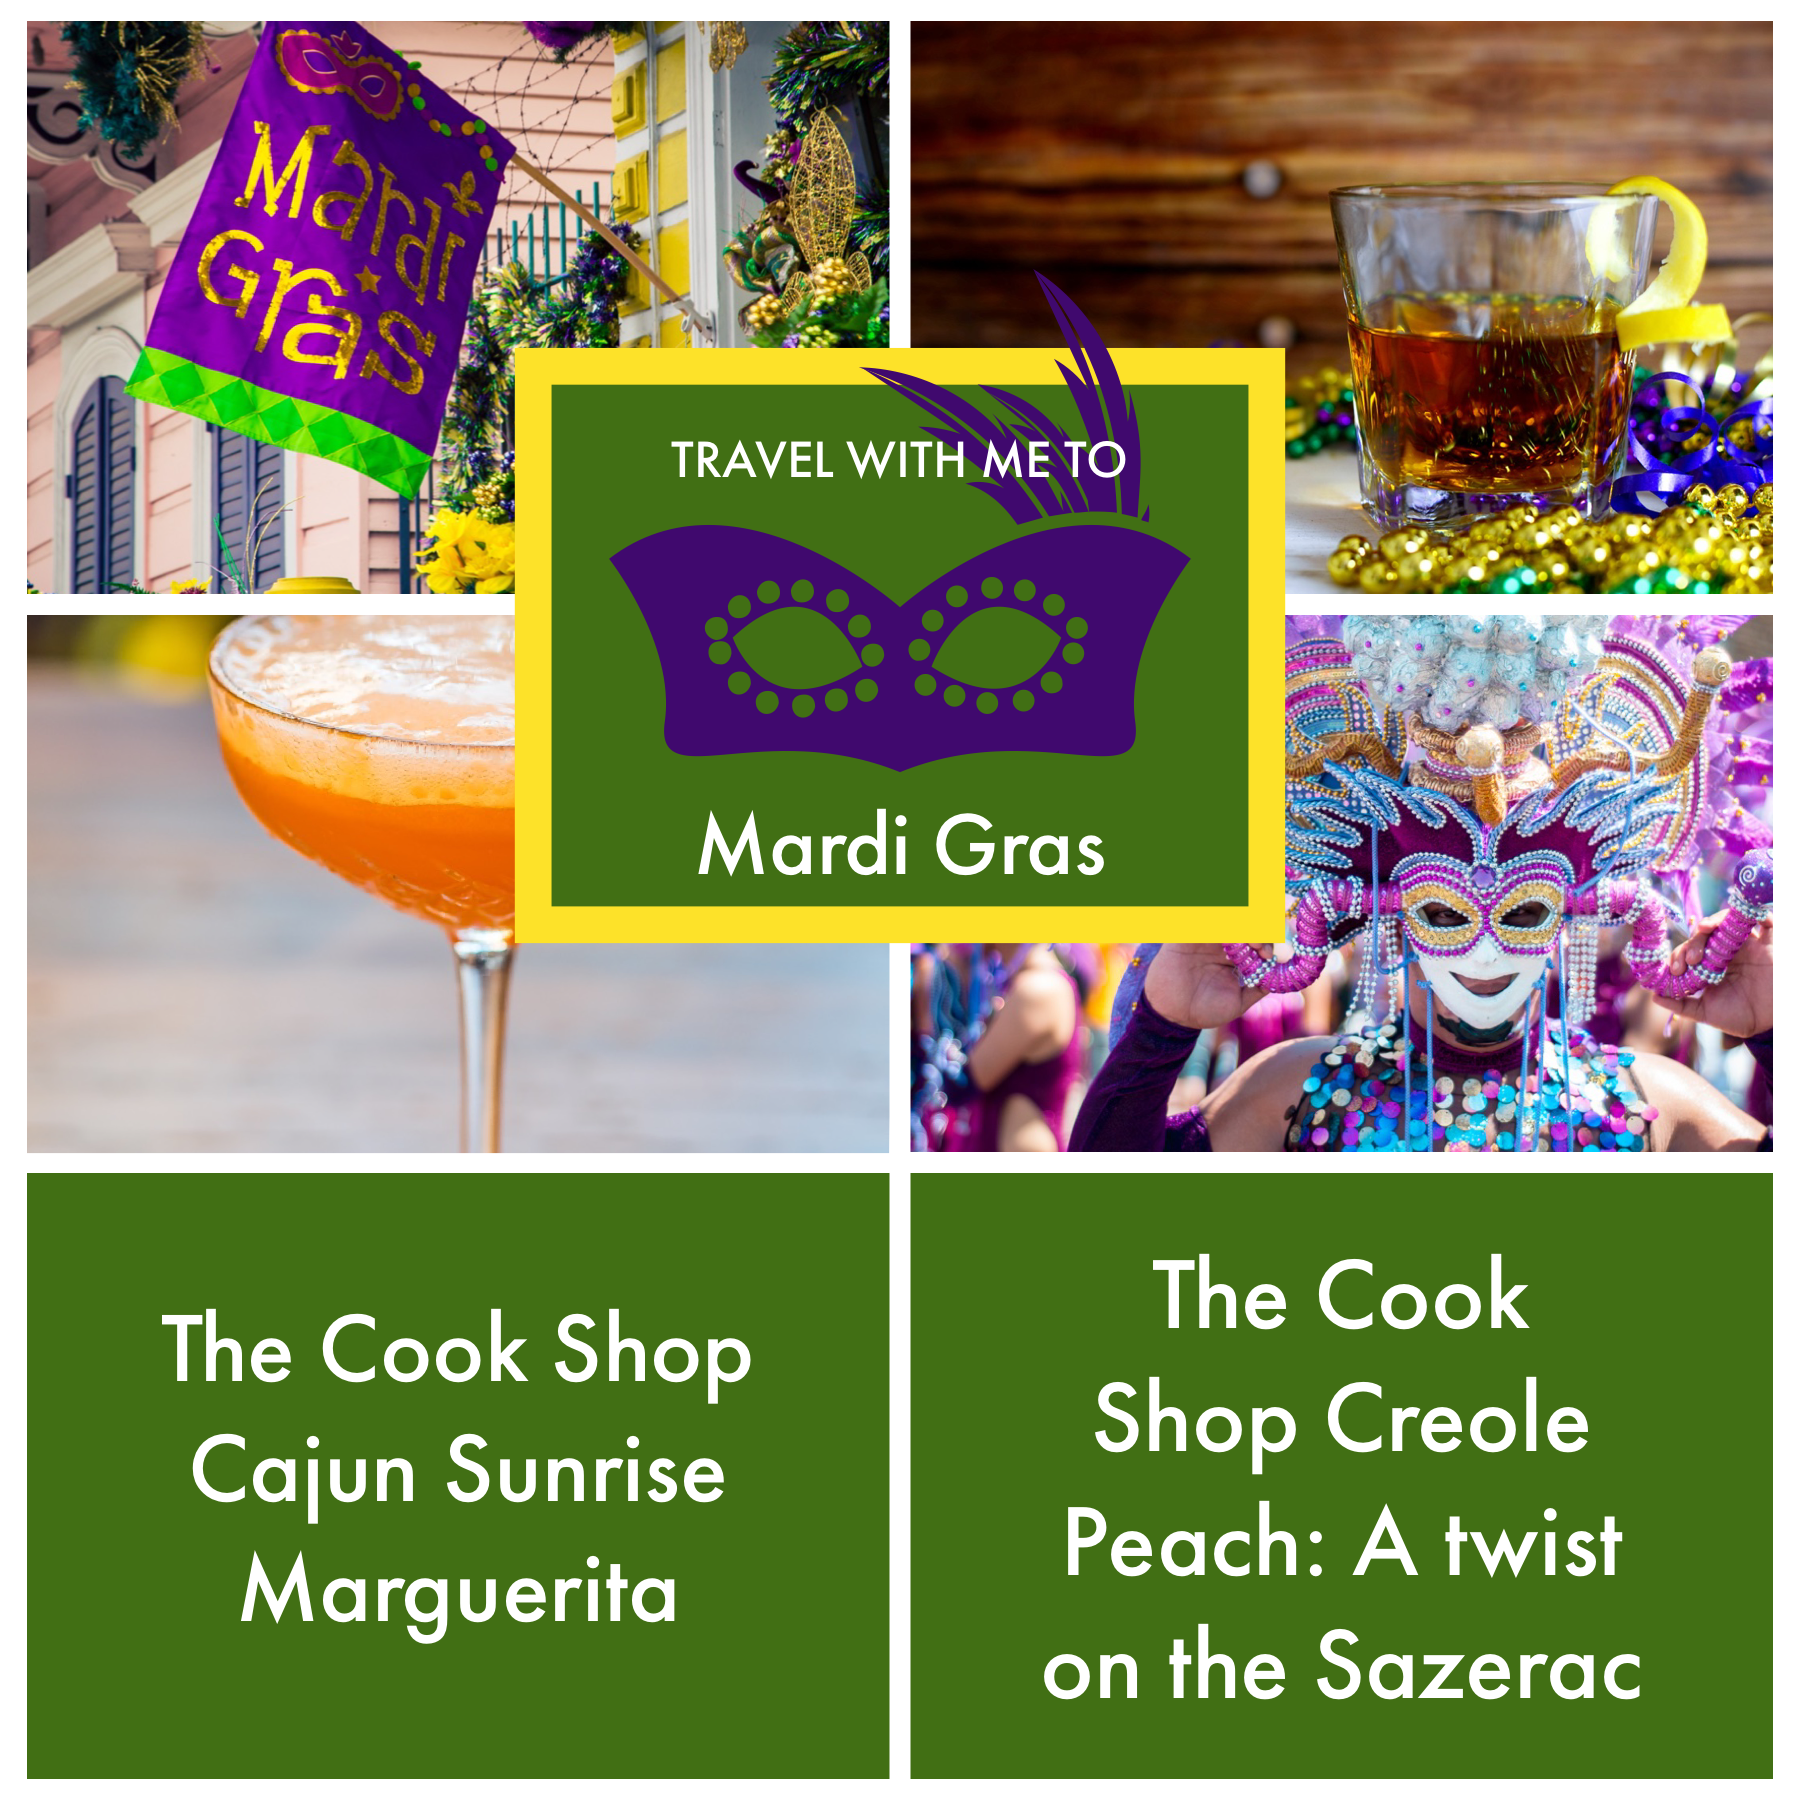 KING CAKE, COOKING & COCKTAILS: The Drinks